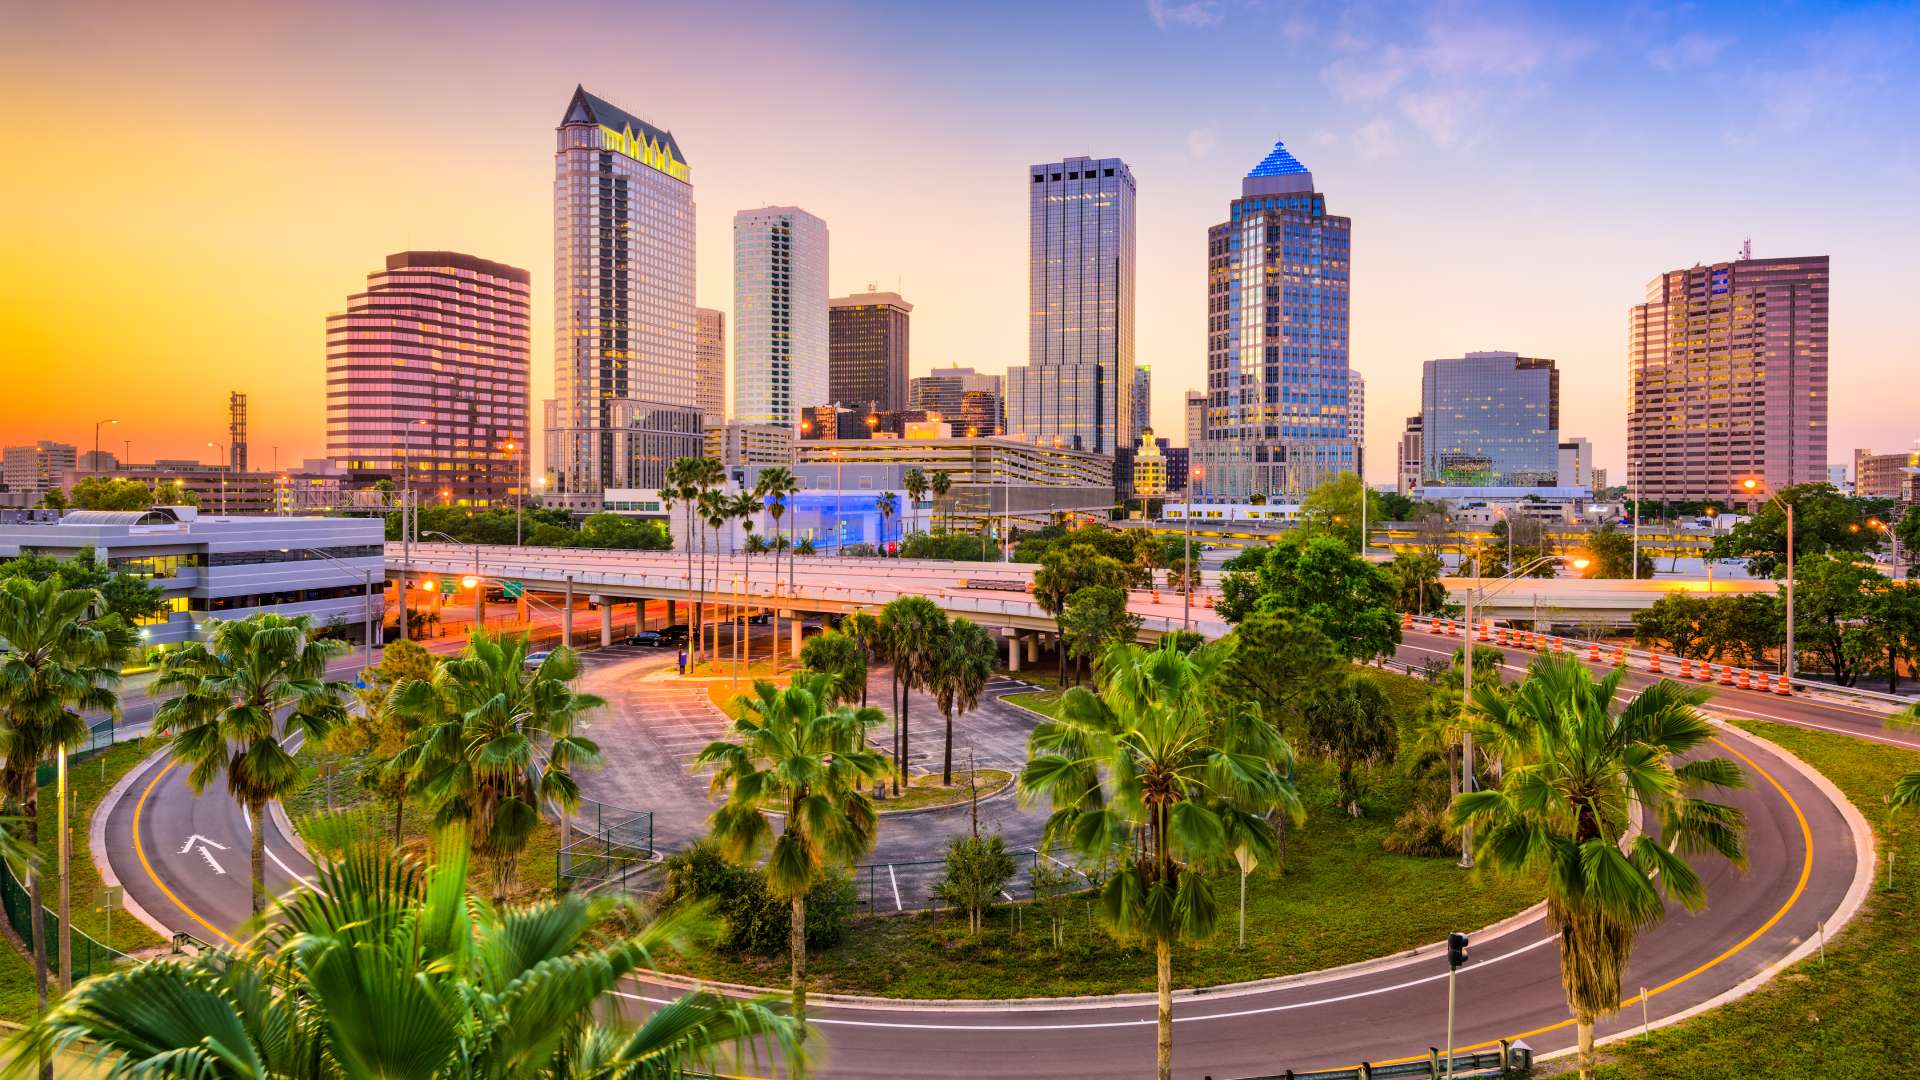 Skyline view of downtown Tampa, Florida.